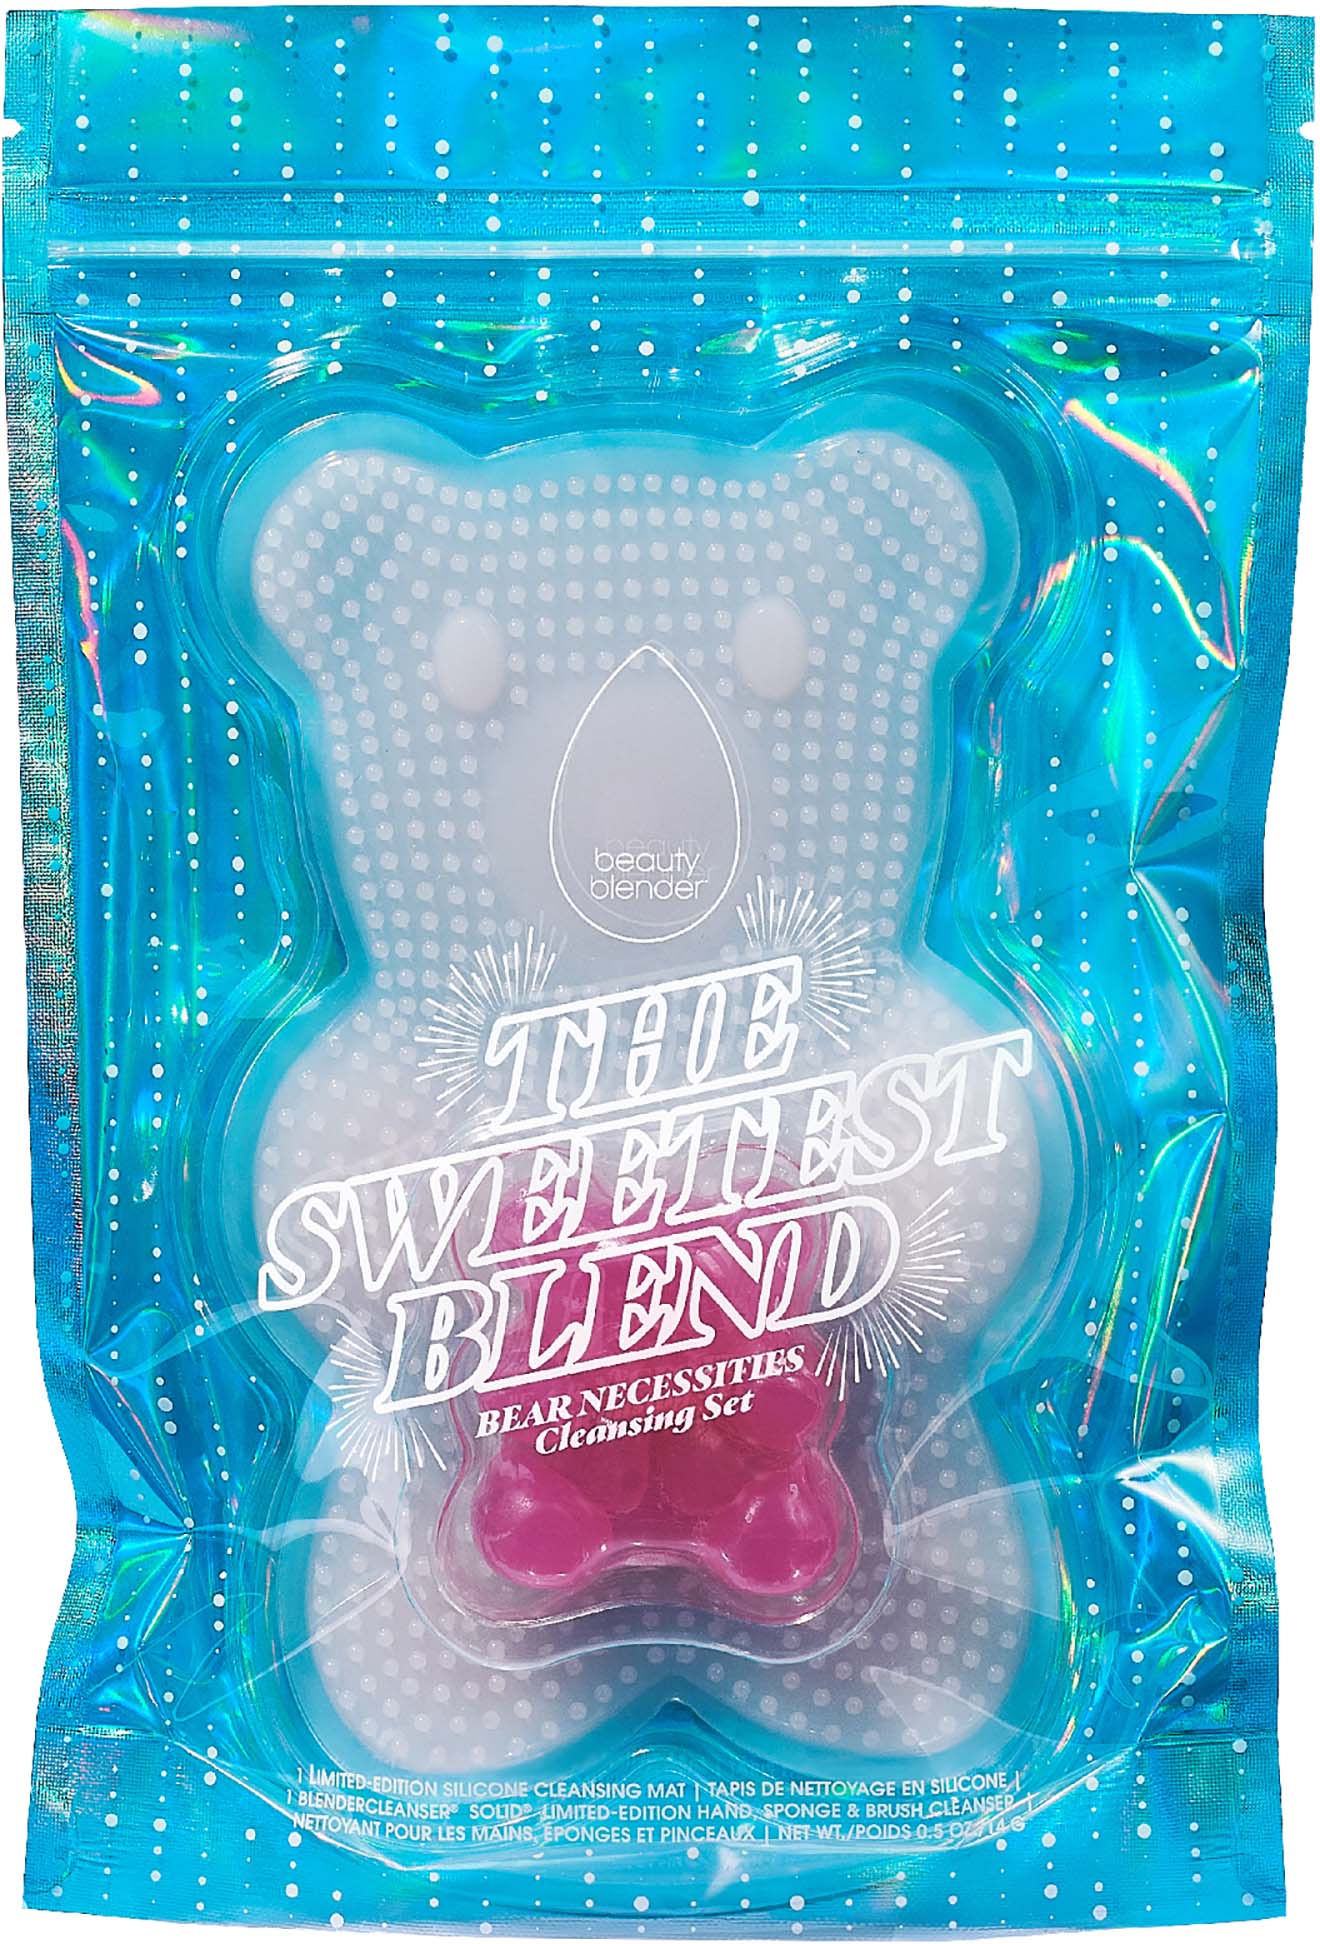 https://lyko.com/globalassets/product-images/beautyblender-the-sweetest-blend-bear-necessities-cleansing--1821-200-0000_3.jpg?ref=204F7353C1